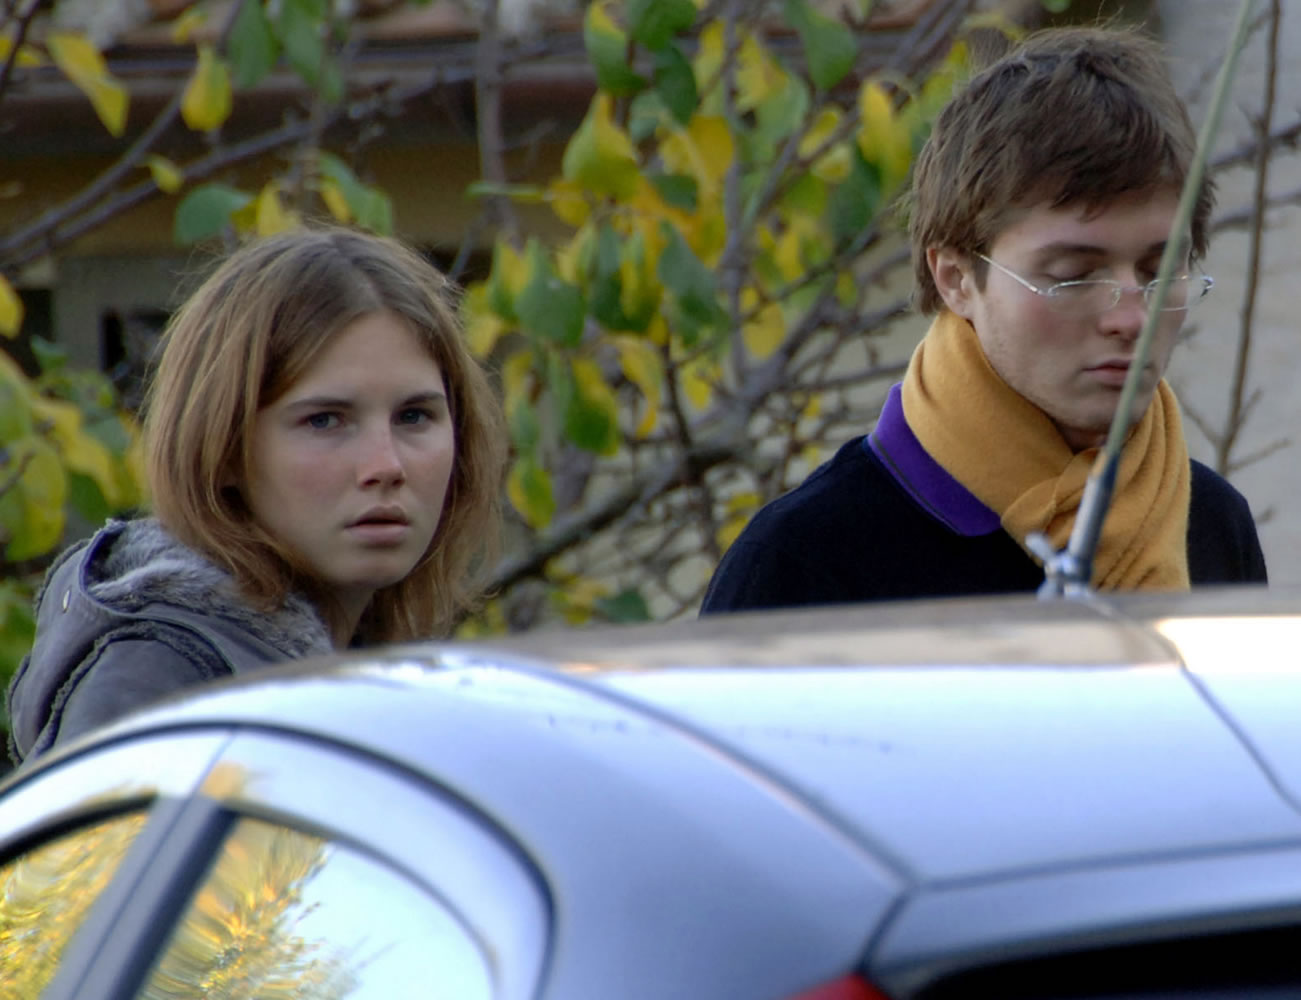 Amanda Marie Knox, left, and Raffaele Sollecito, stand outside the rented house where 21-year-old British student Meredith Kercher was found dead in Perugia, Italy, on Nov.